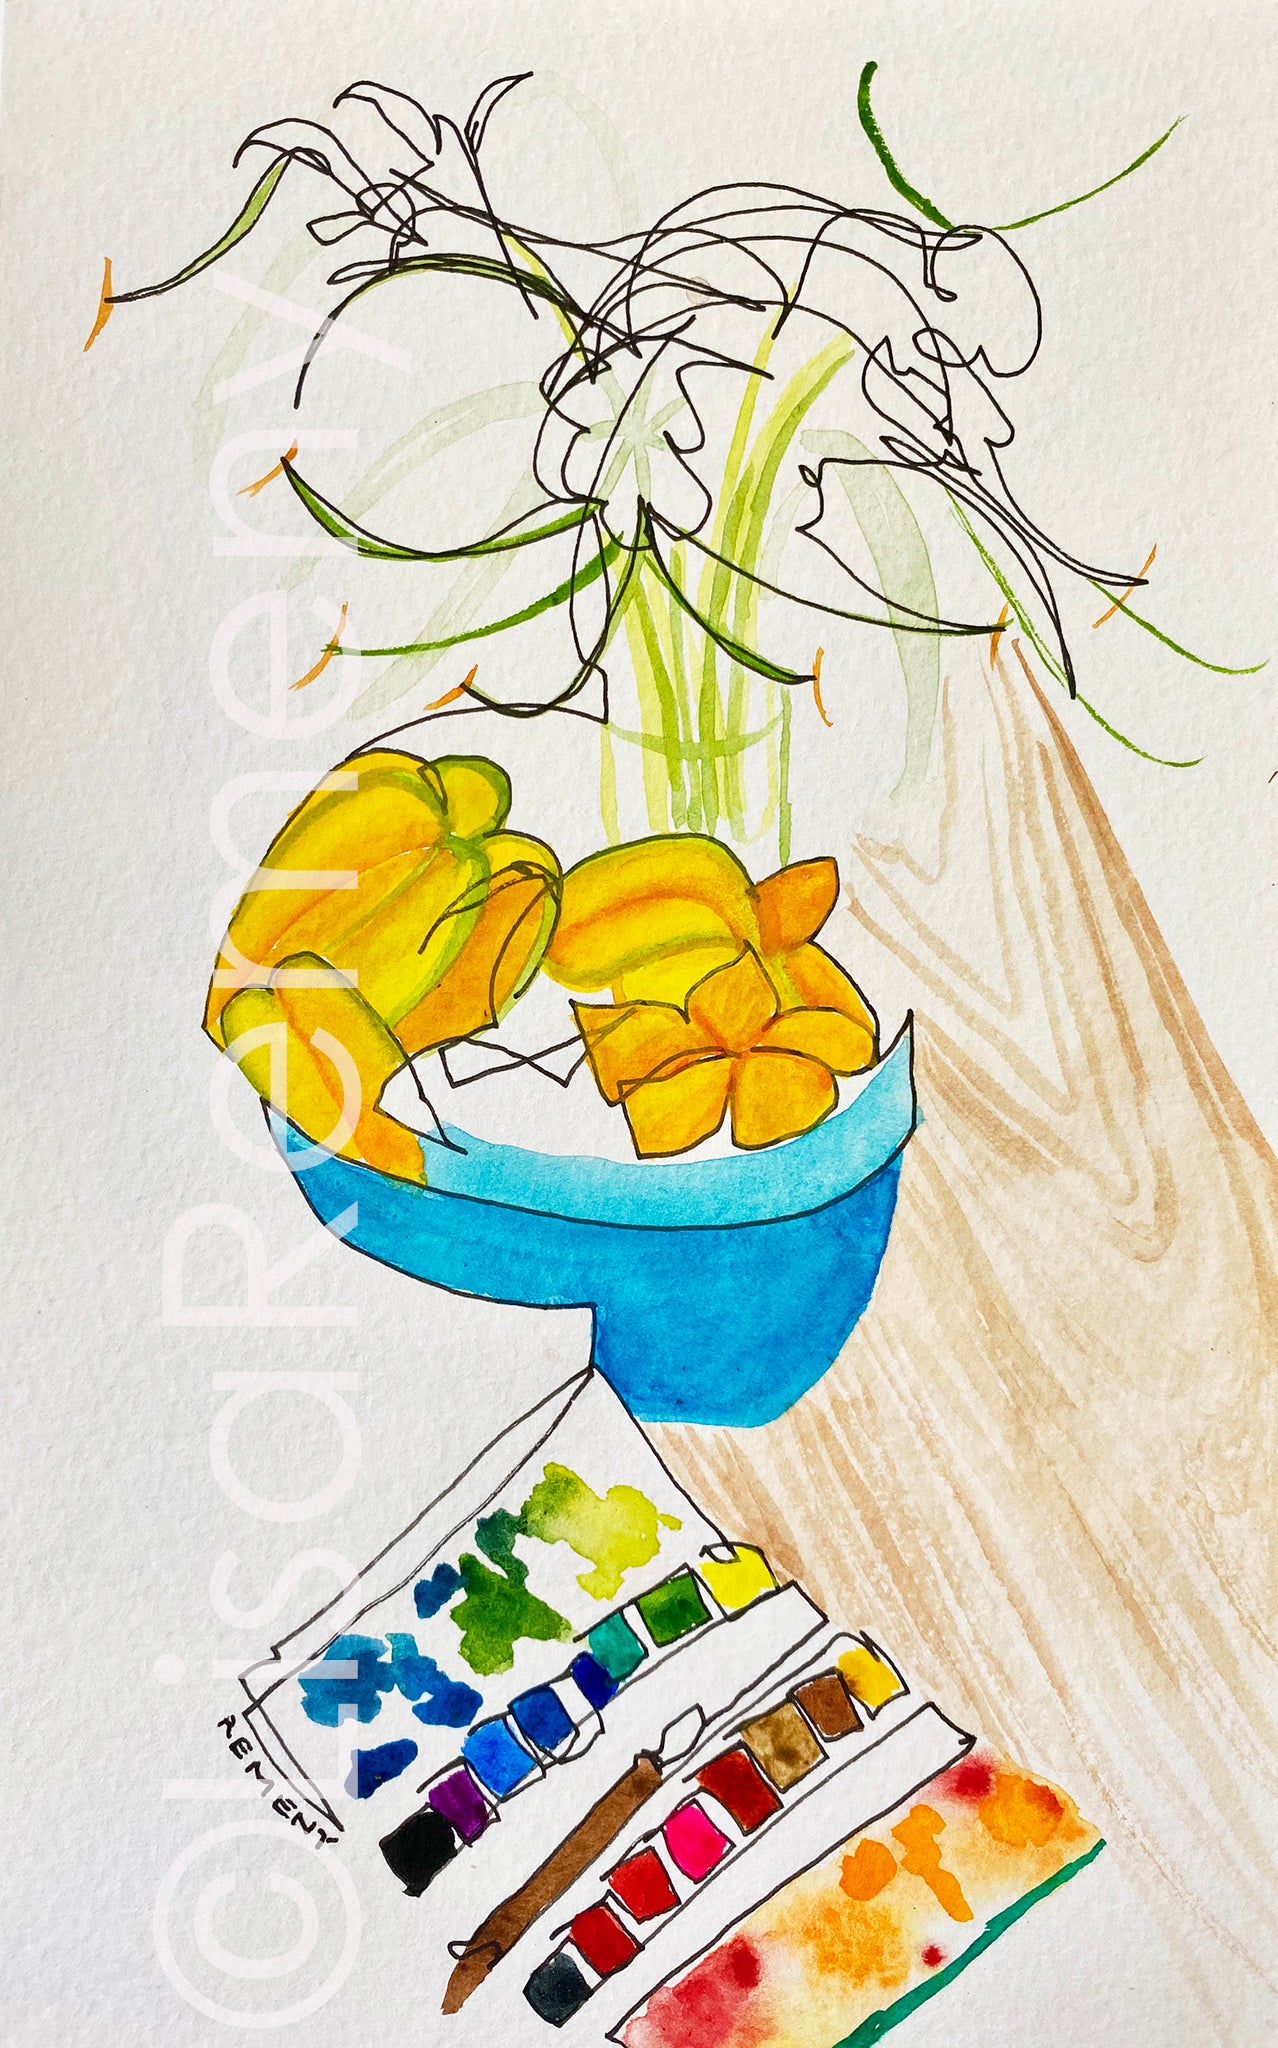 Watercolor & Ink on Paper - Star Fruit and Tican Lilies